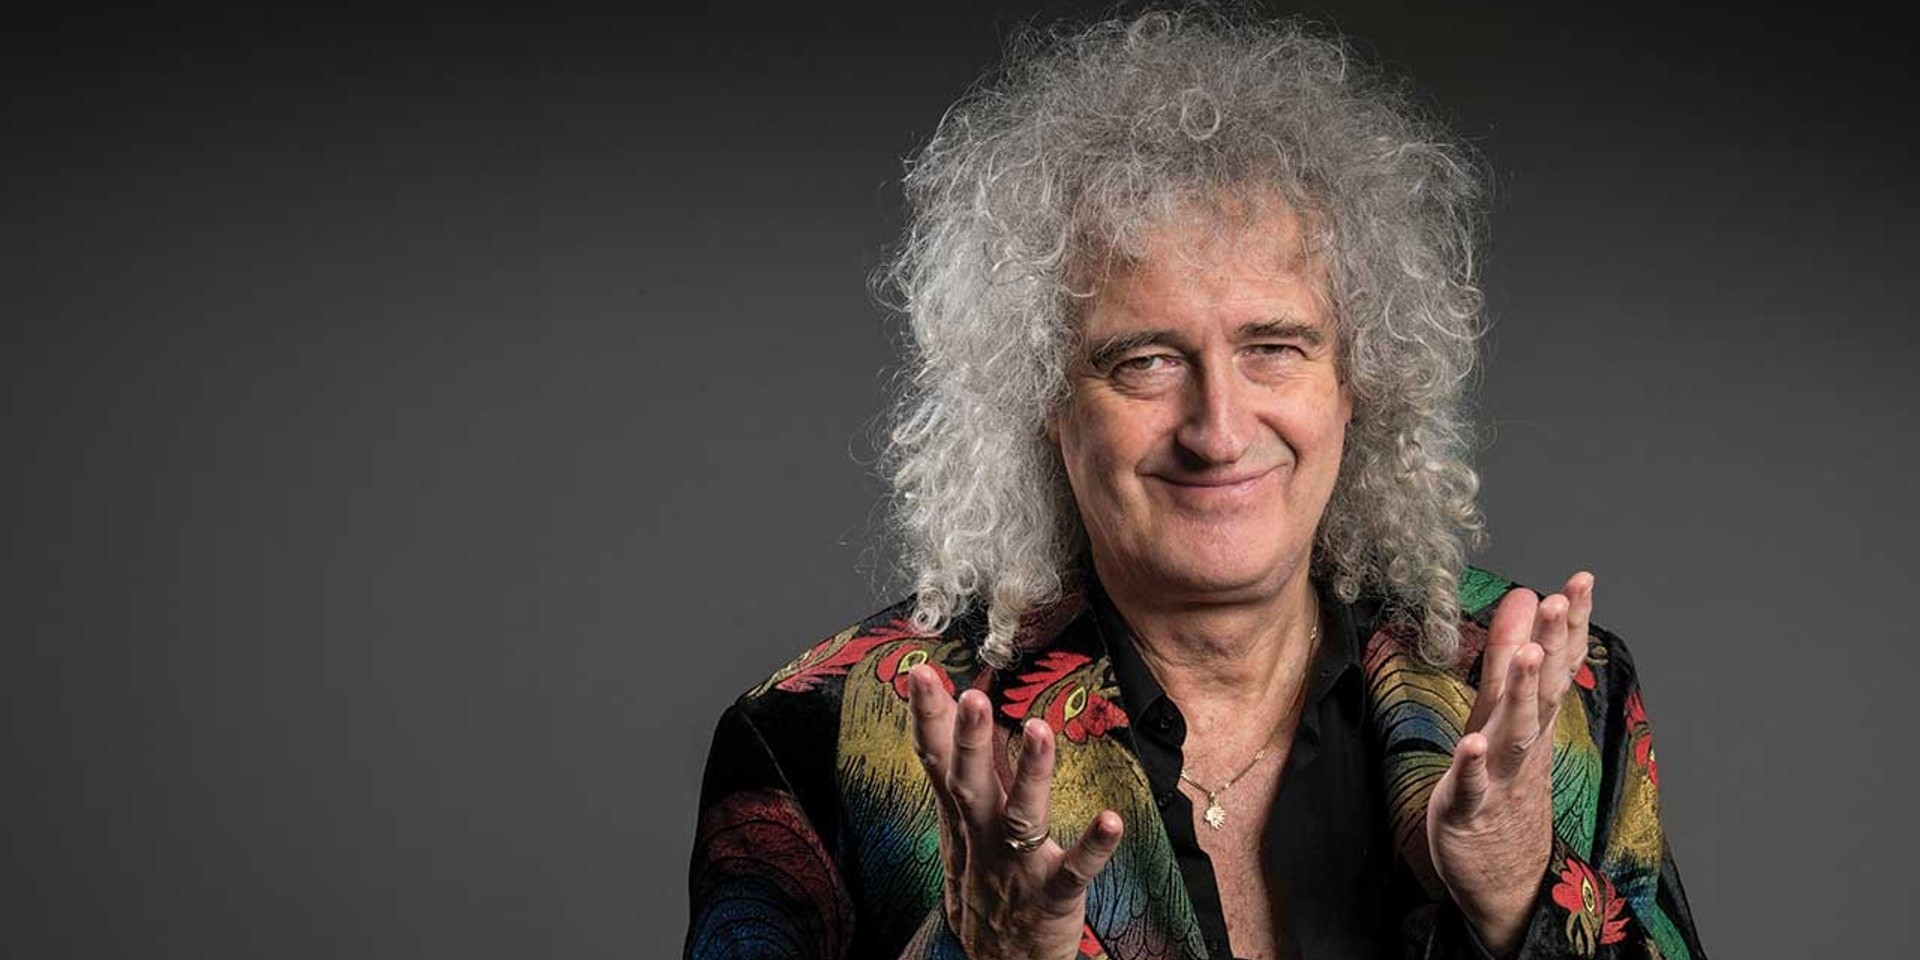 Queen's Brian May releases first new track in 20 years 'New Horizons' – listen 